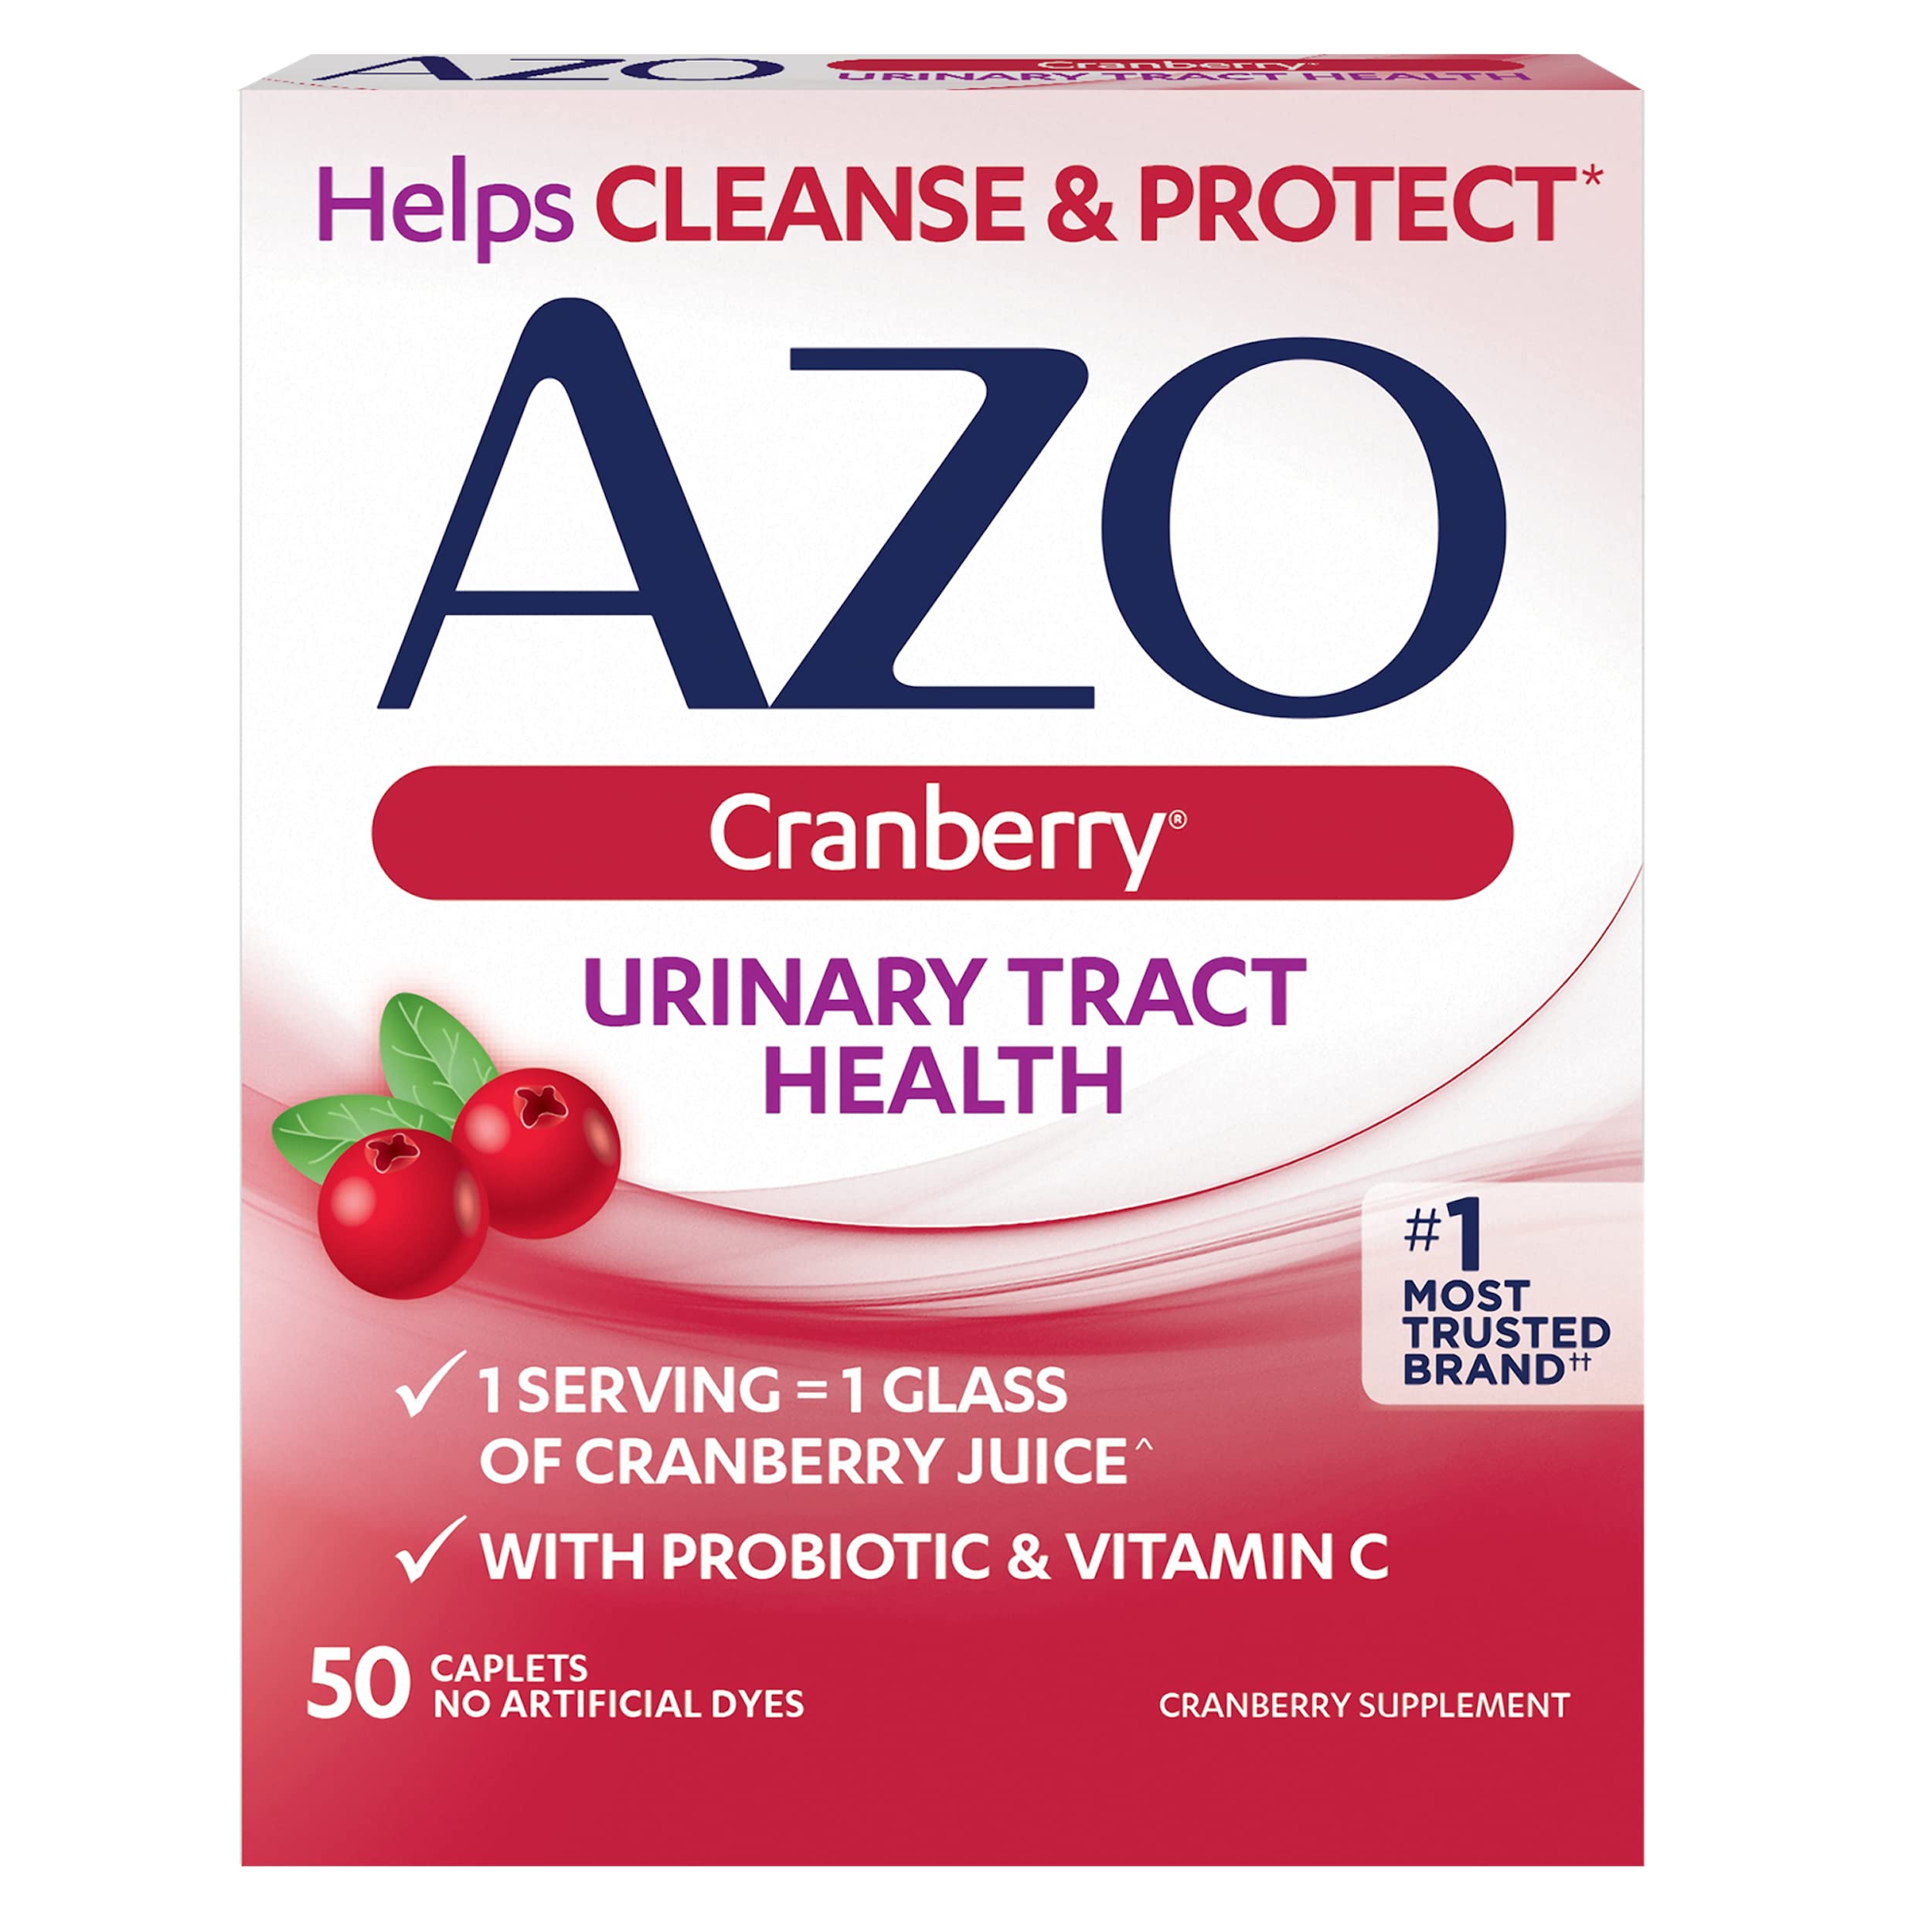 AZO Cranberry Urinary Tract Health Supplement, 1 Serving = 1 Glass of Cranberry Juice, Sugar Free Cranberry Pills, 50 Count